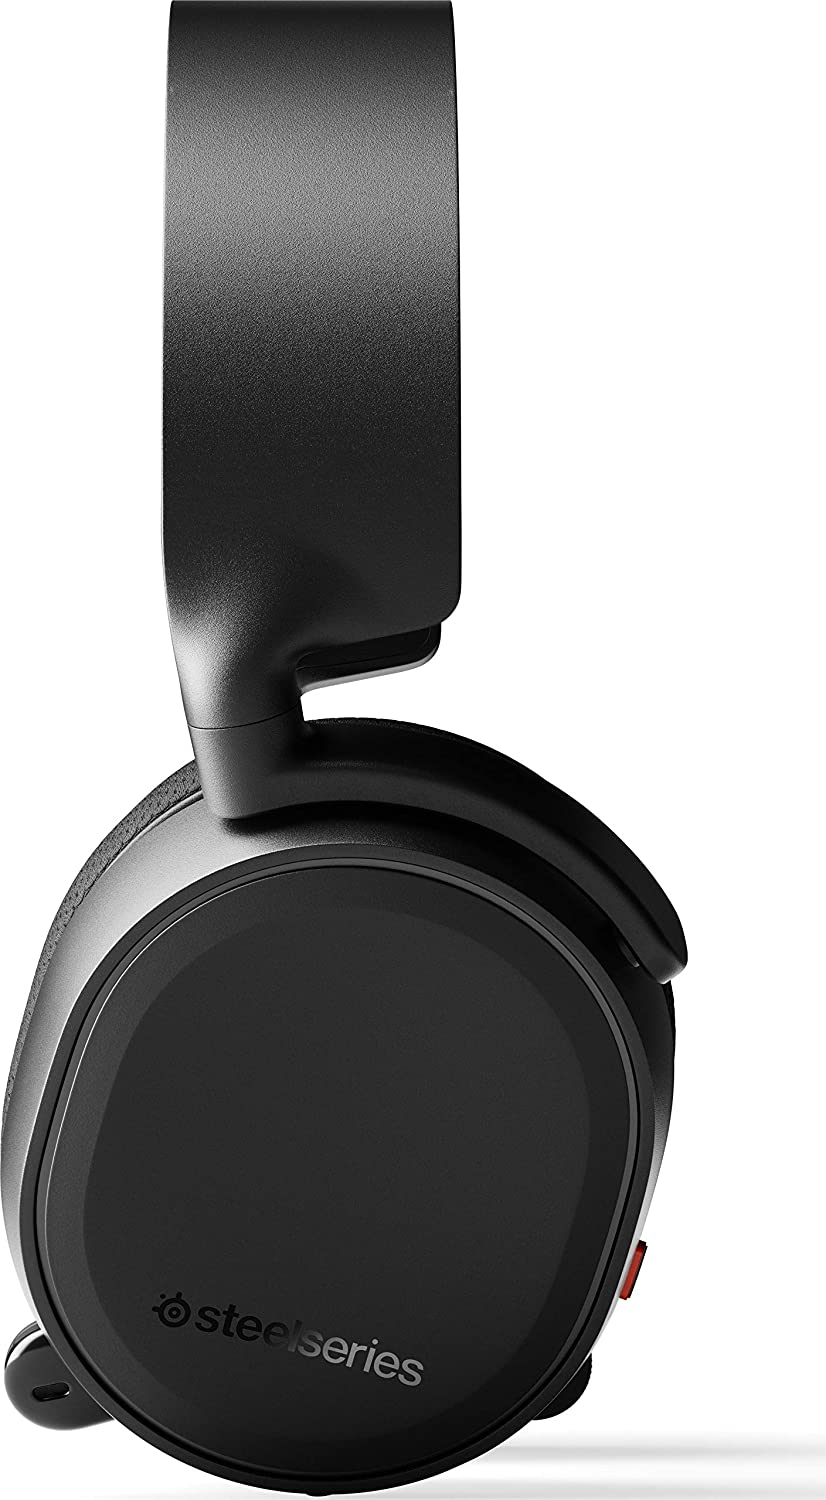 SteelSeries Arctis 3 Console - Stereo Wired Gaming Headset - Black [2020 Edition]